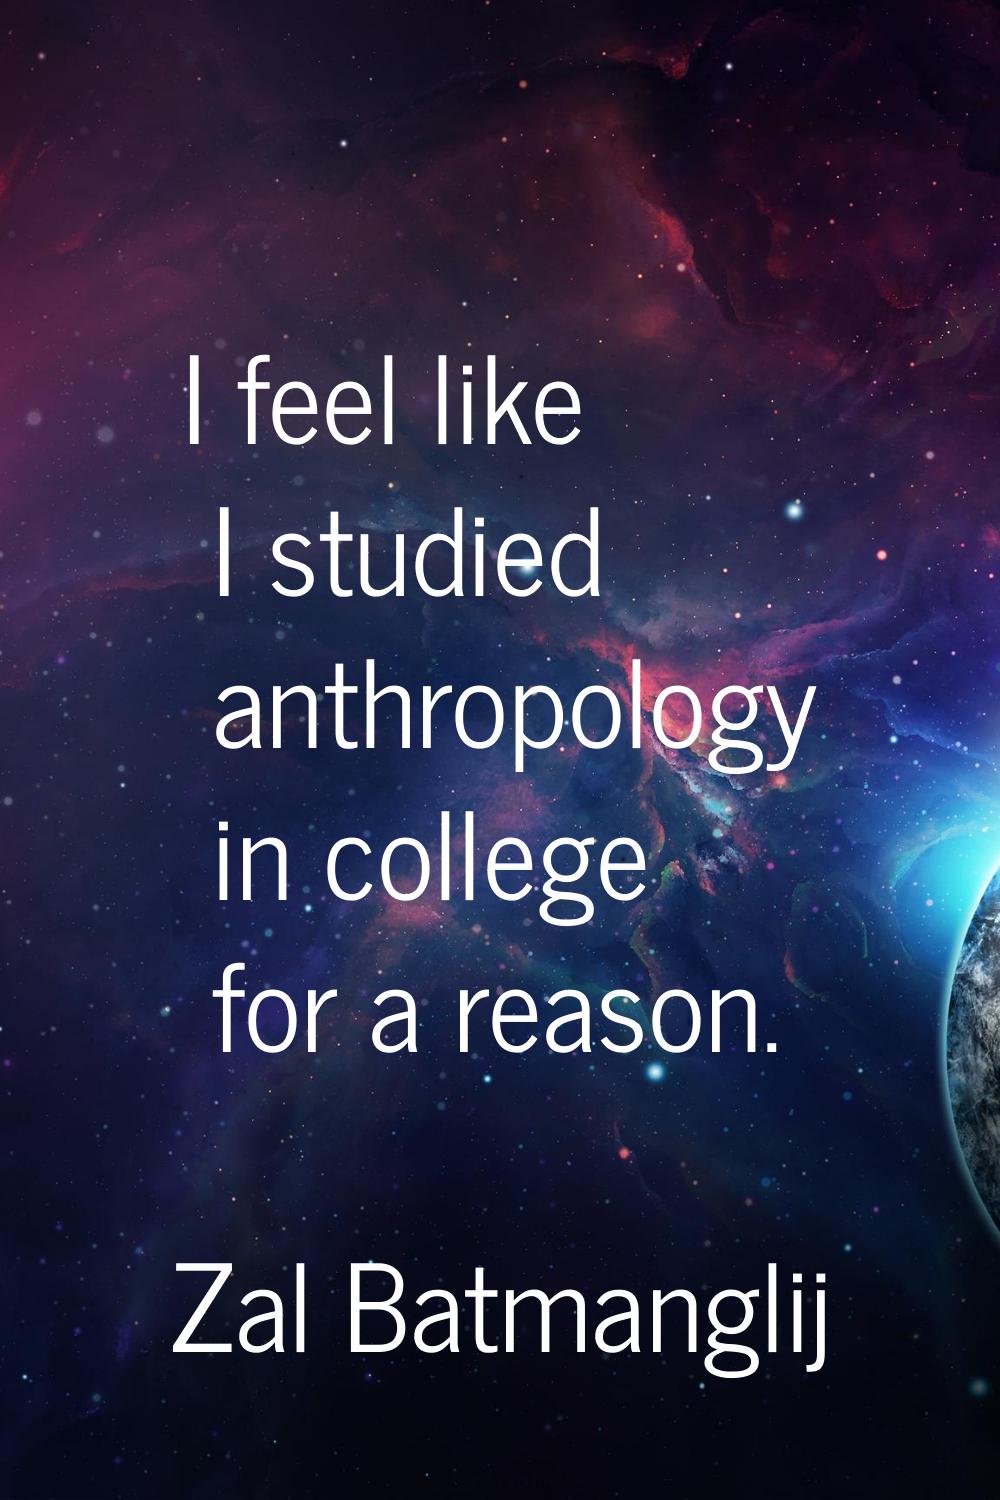 I feel like I studied anthropology in college for a reason.